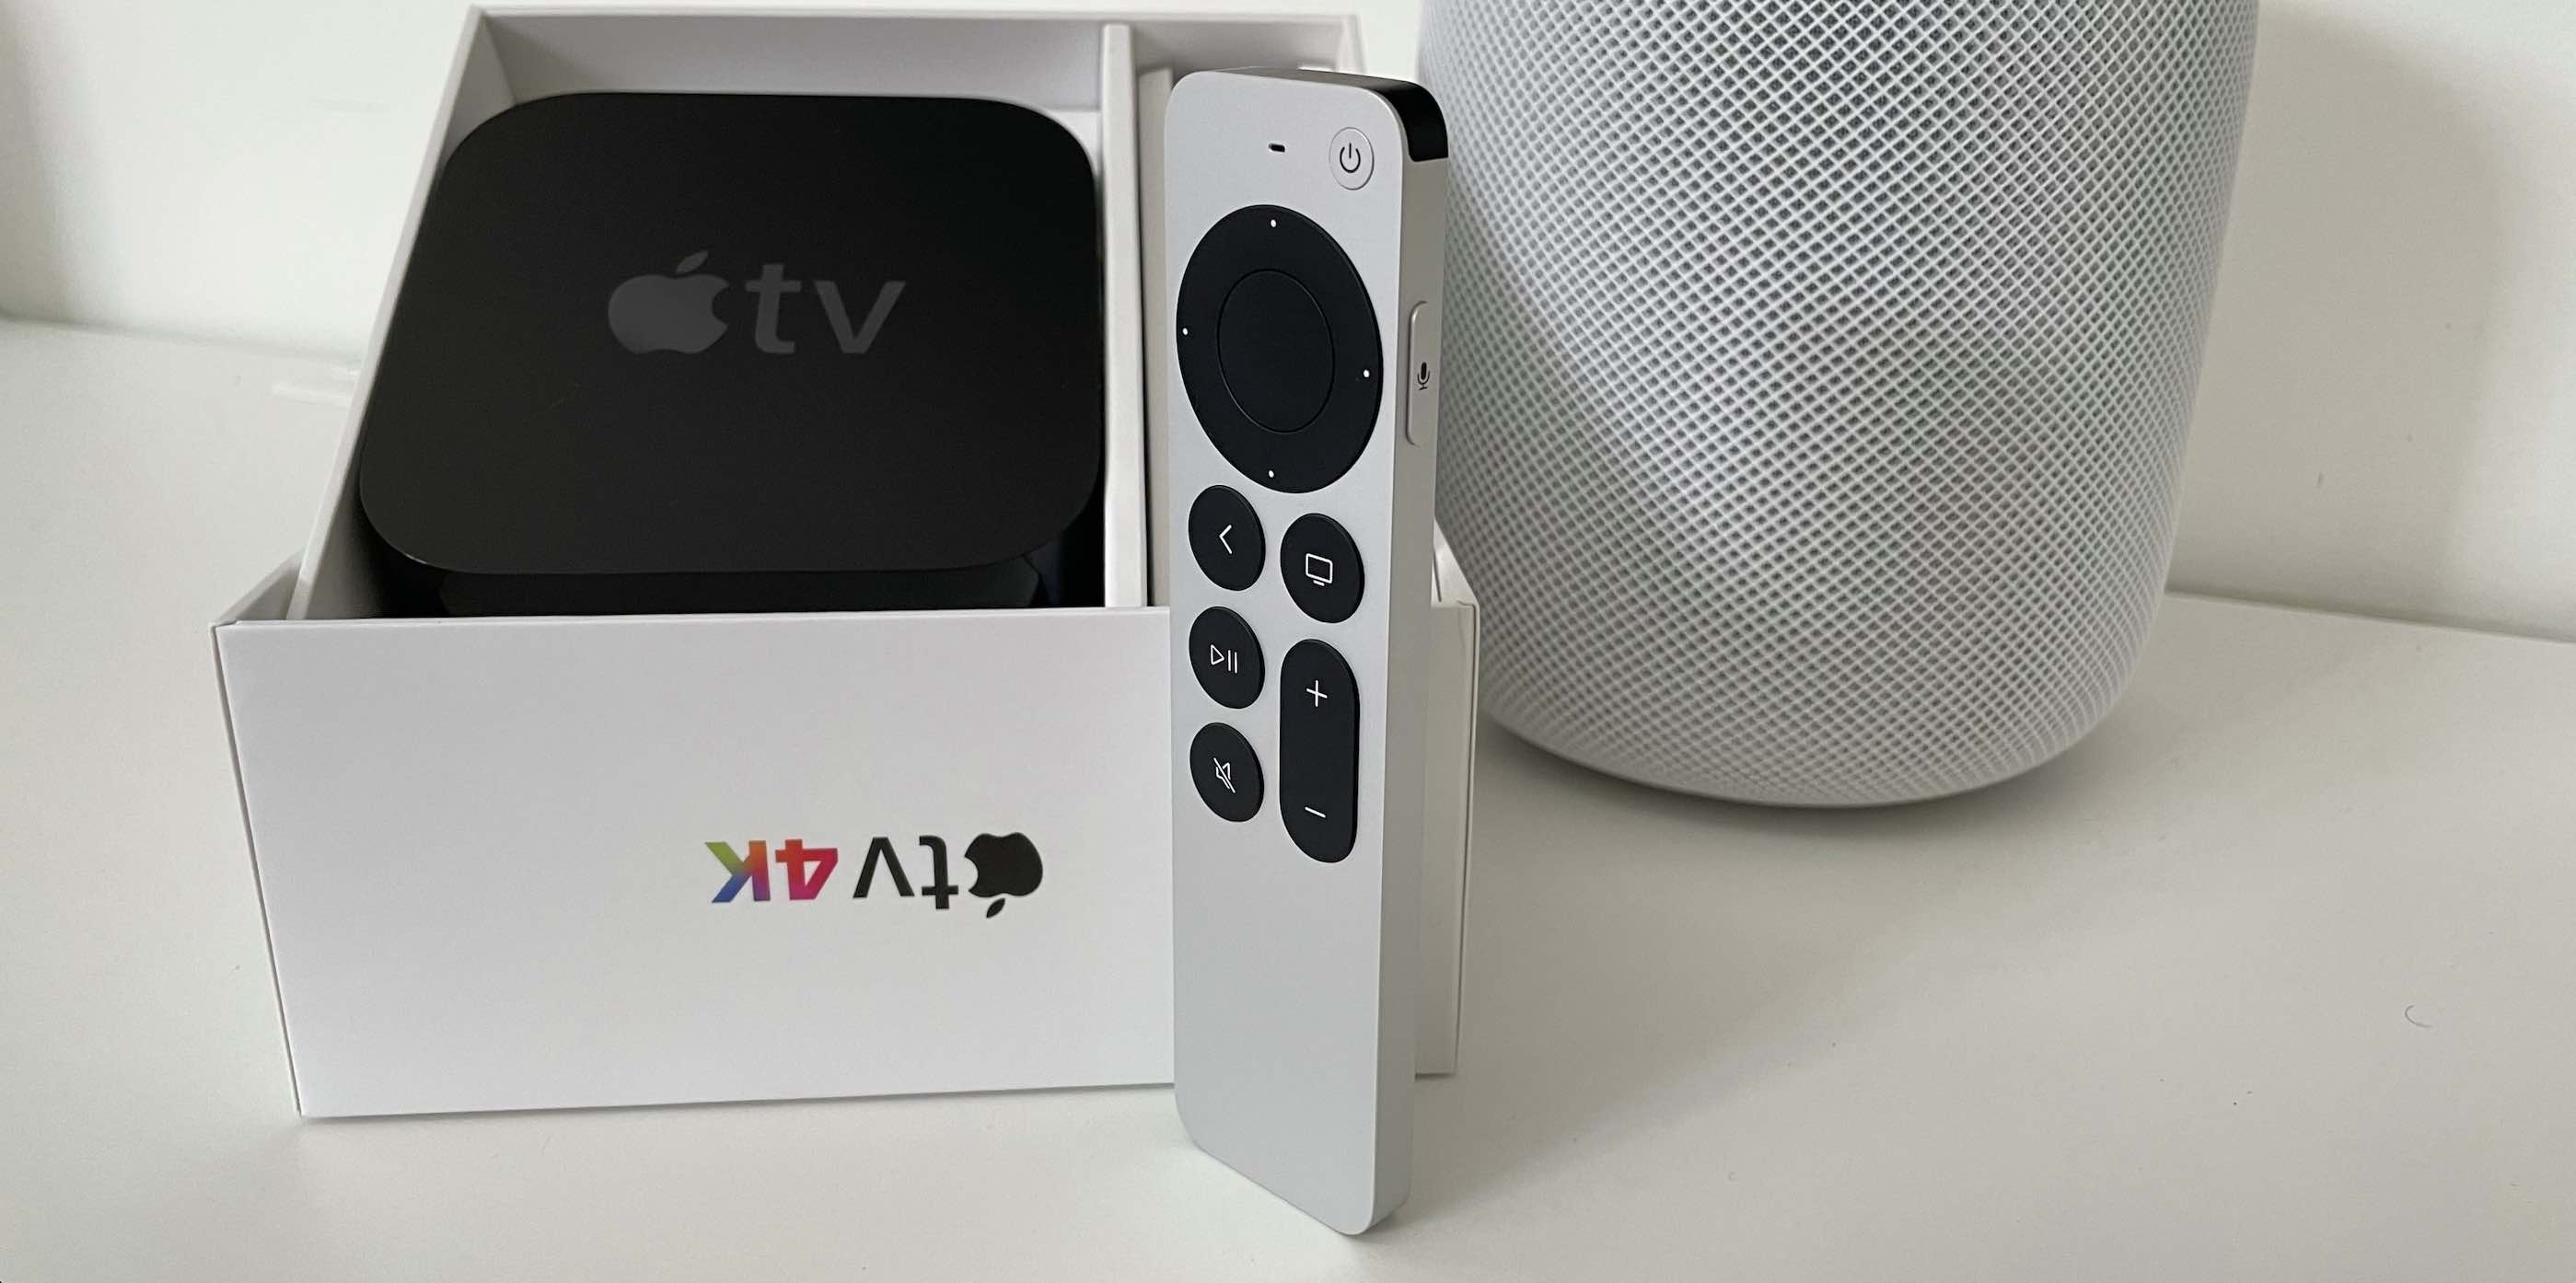 Apple TV Siri Remote: How control TVs and receivers - 9to5Mac